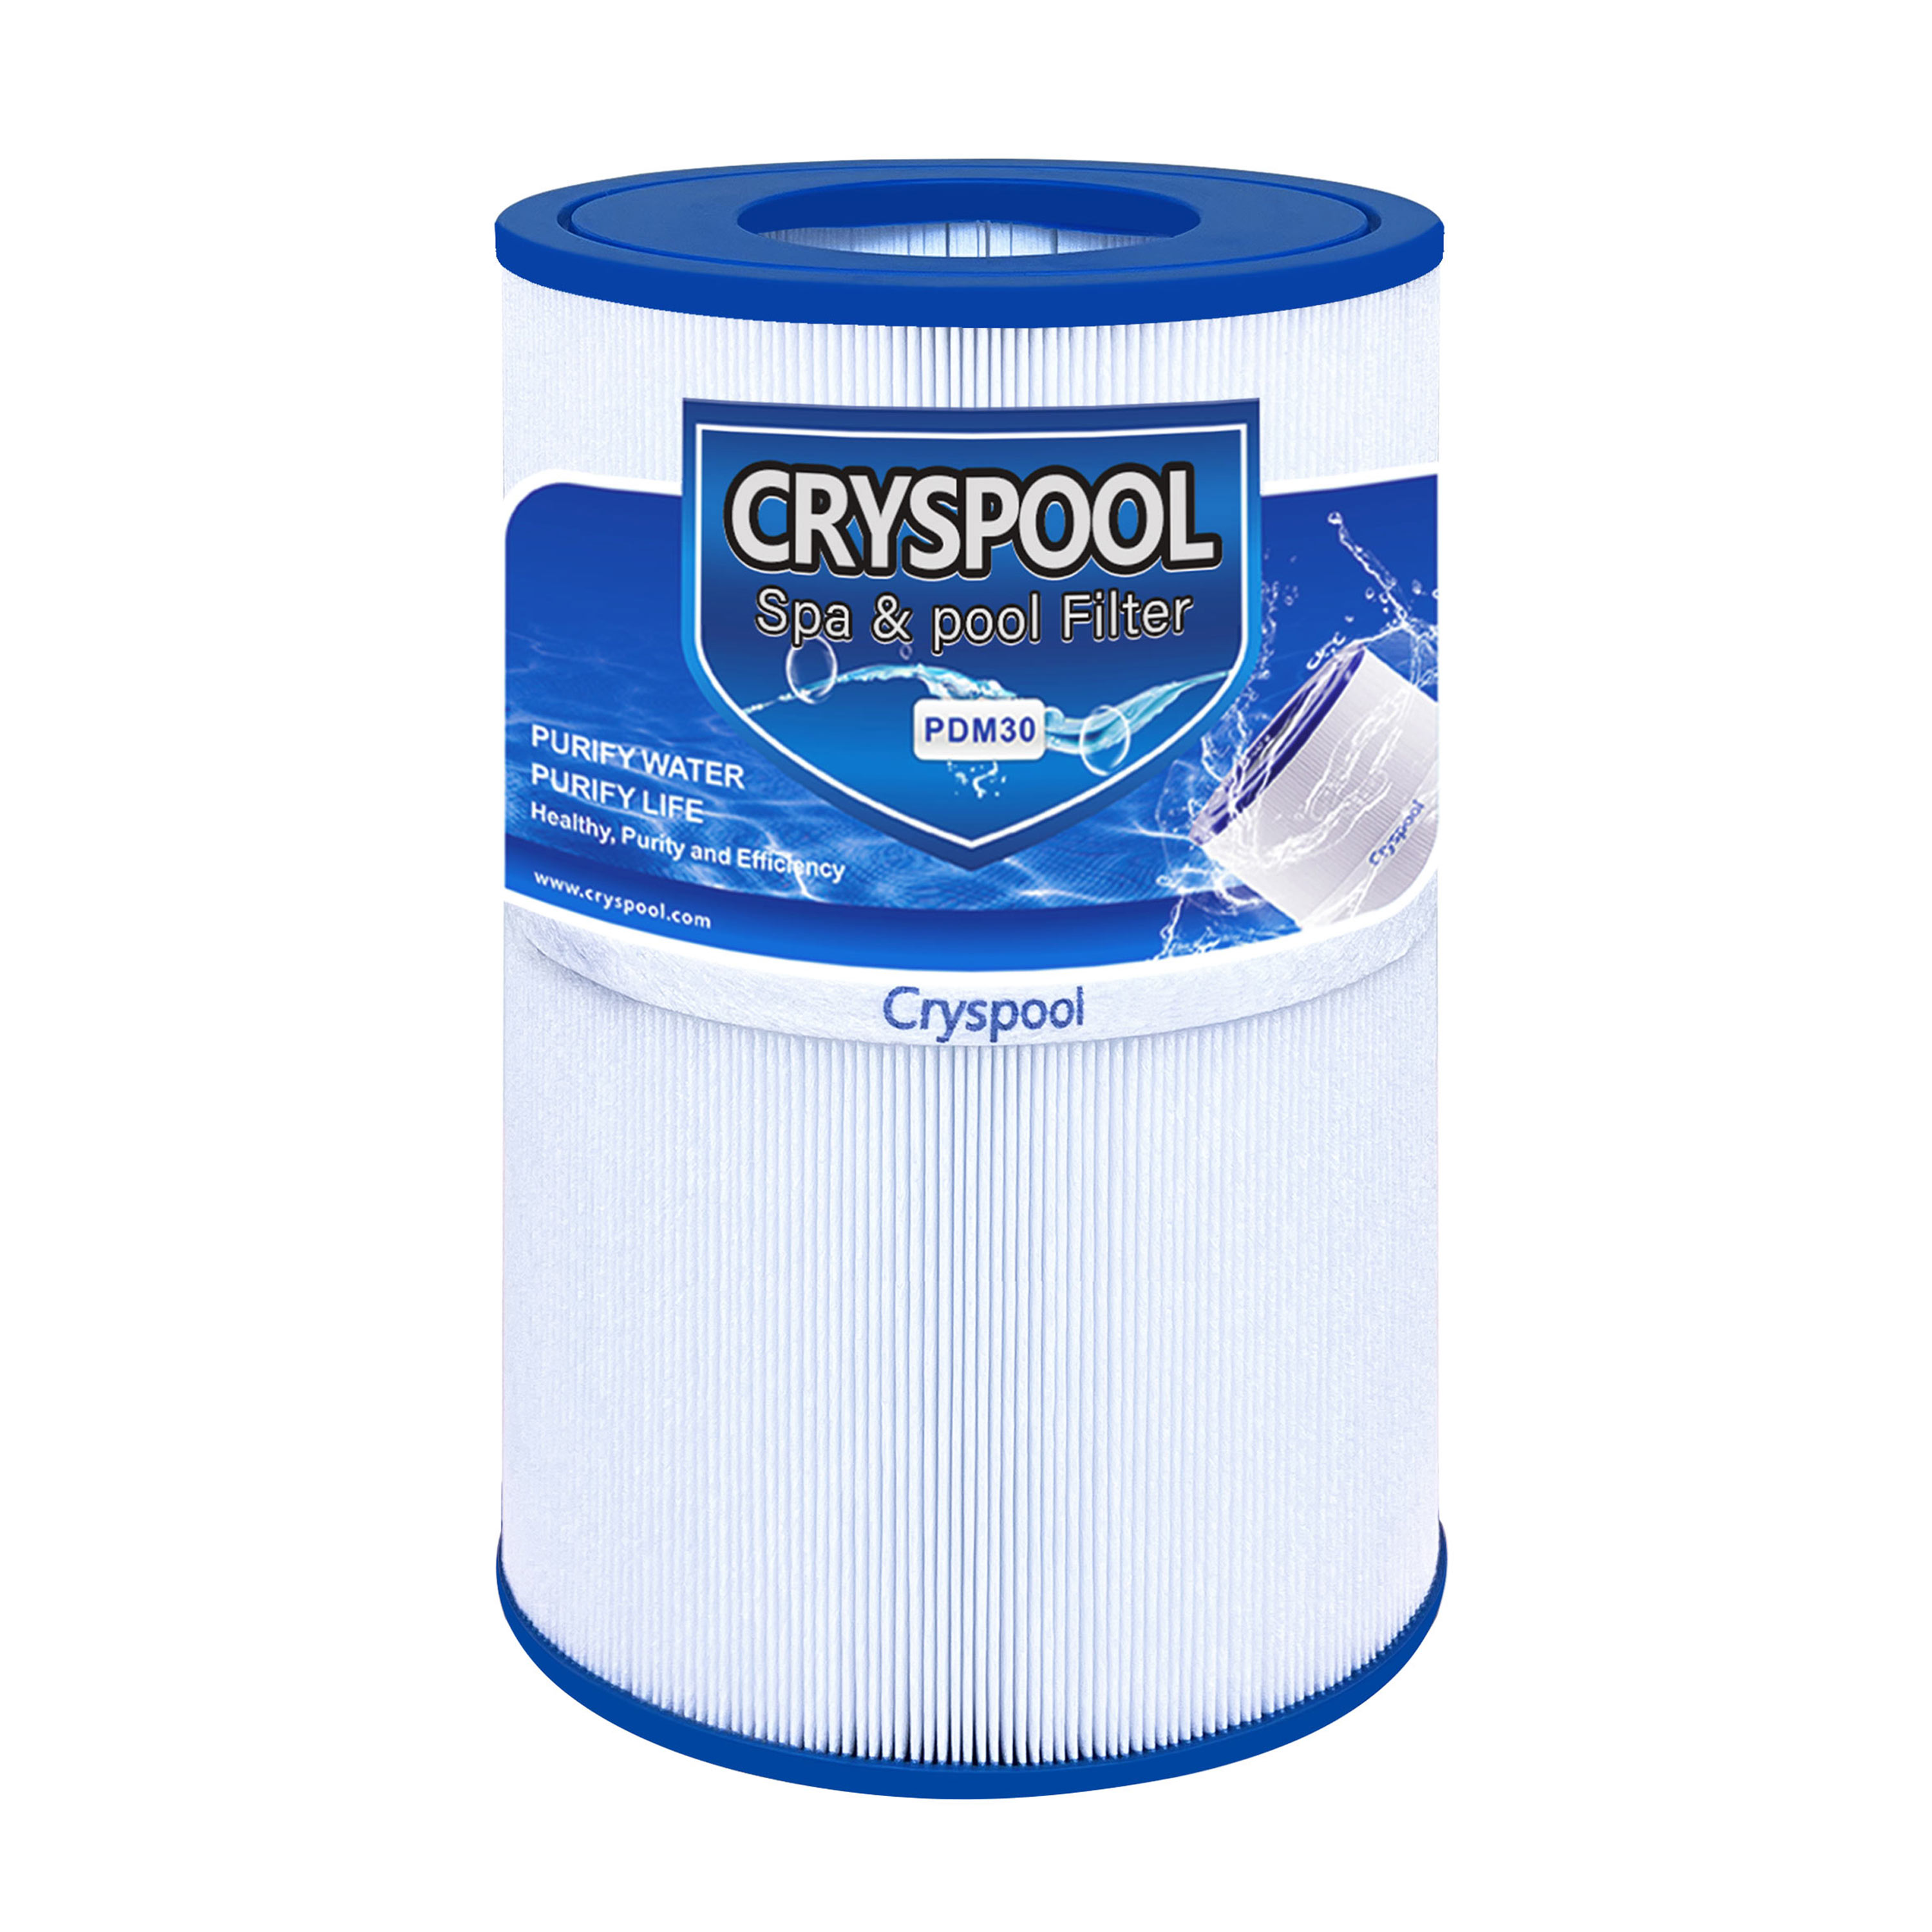 Cryspool Spa Filter Compatible with Pleatco PDM30, 461269 Featured Image